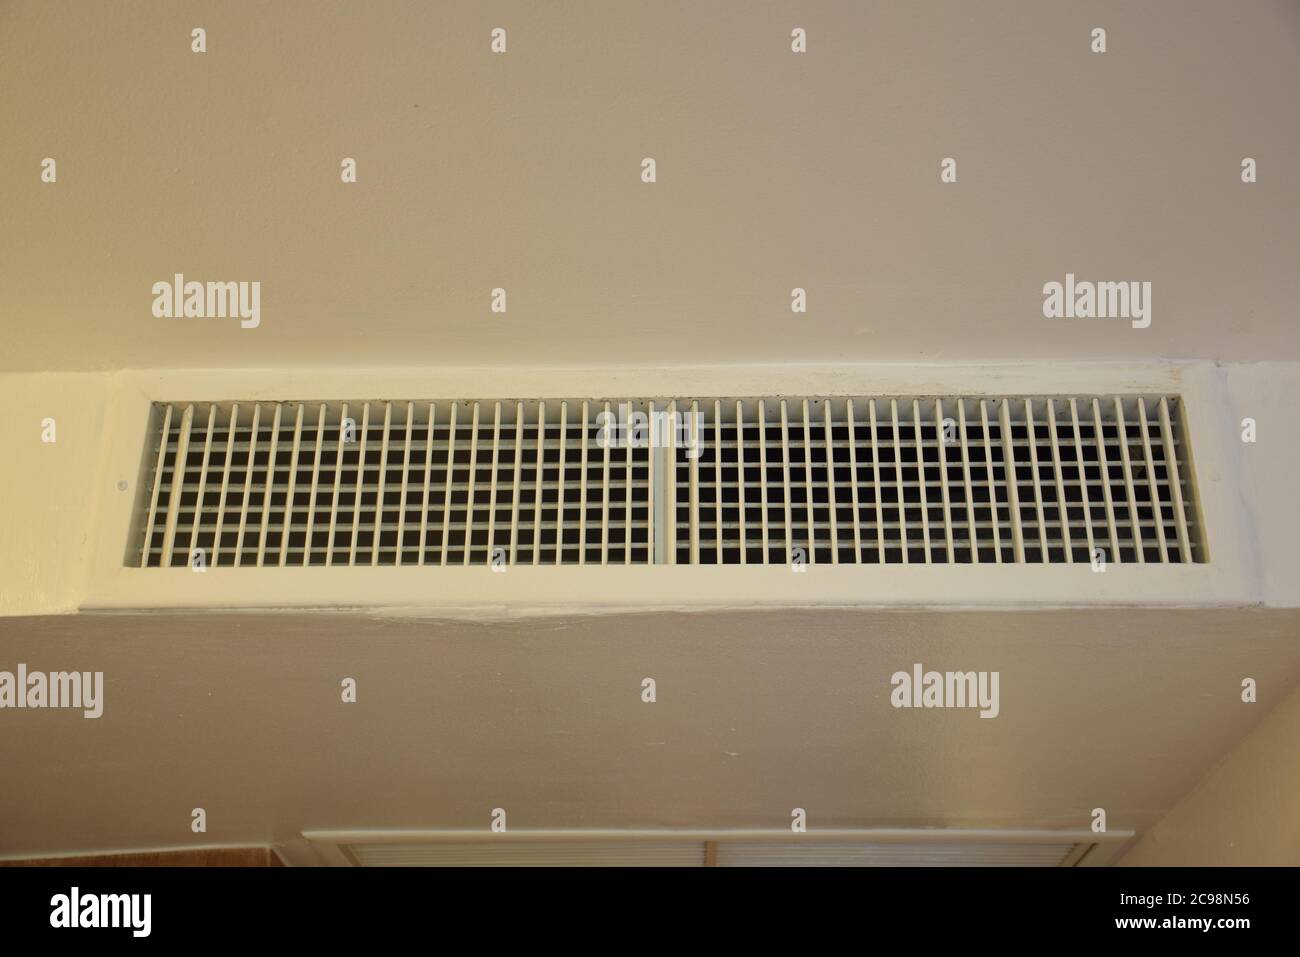 Double deflection grille - Supply Air Grille in Hotel room Stock Photo